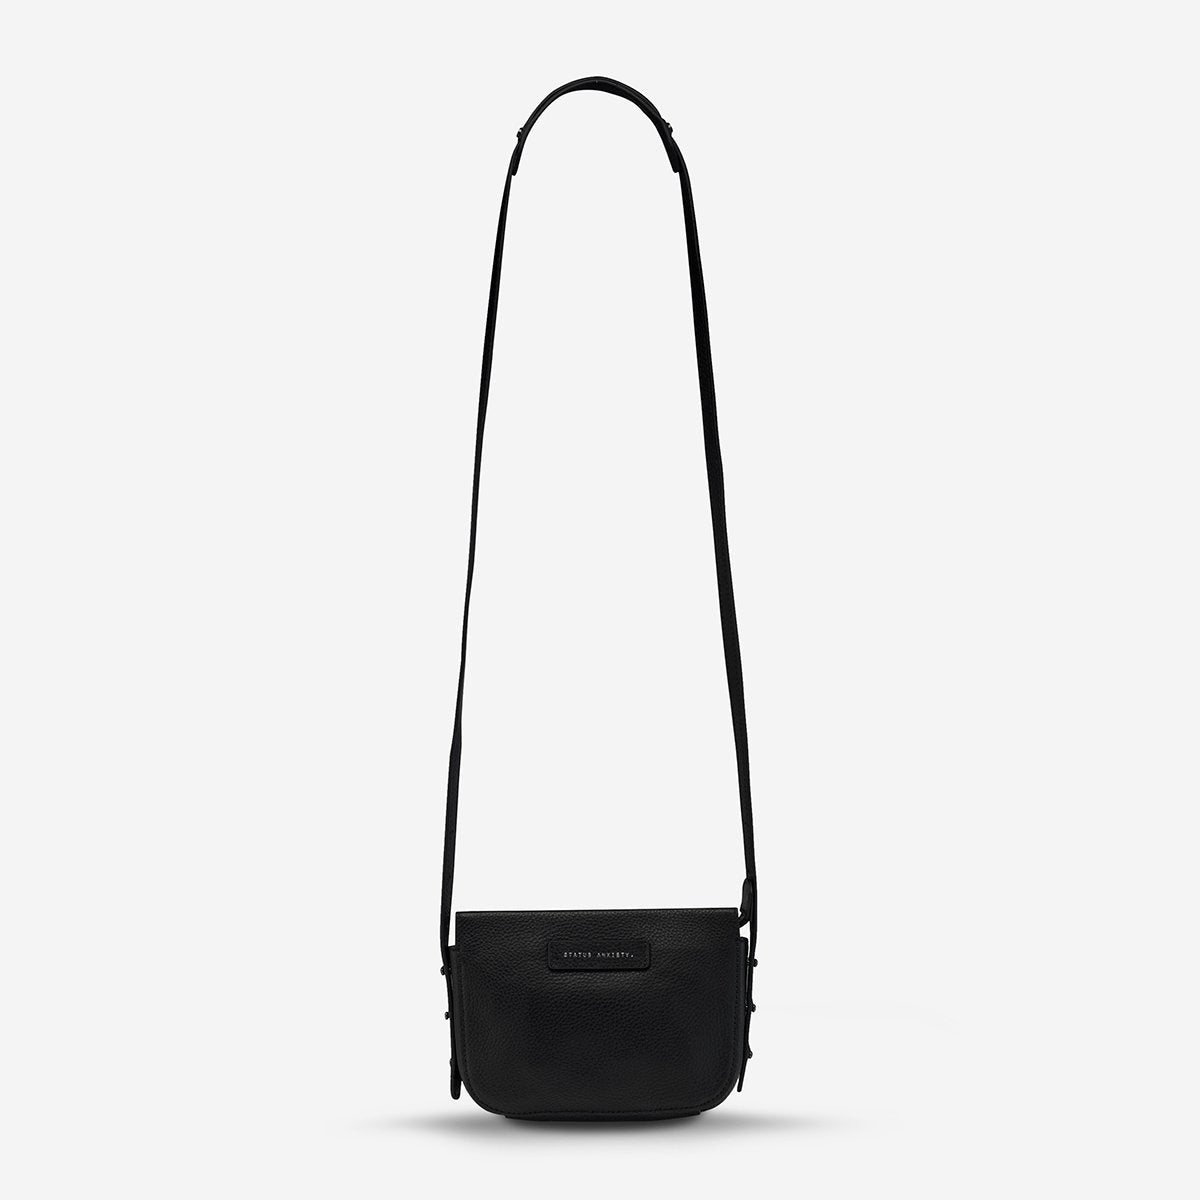 Status Anxiety Bag - In Her Command - Black